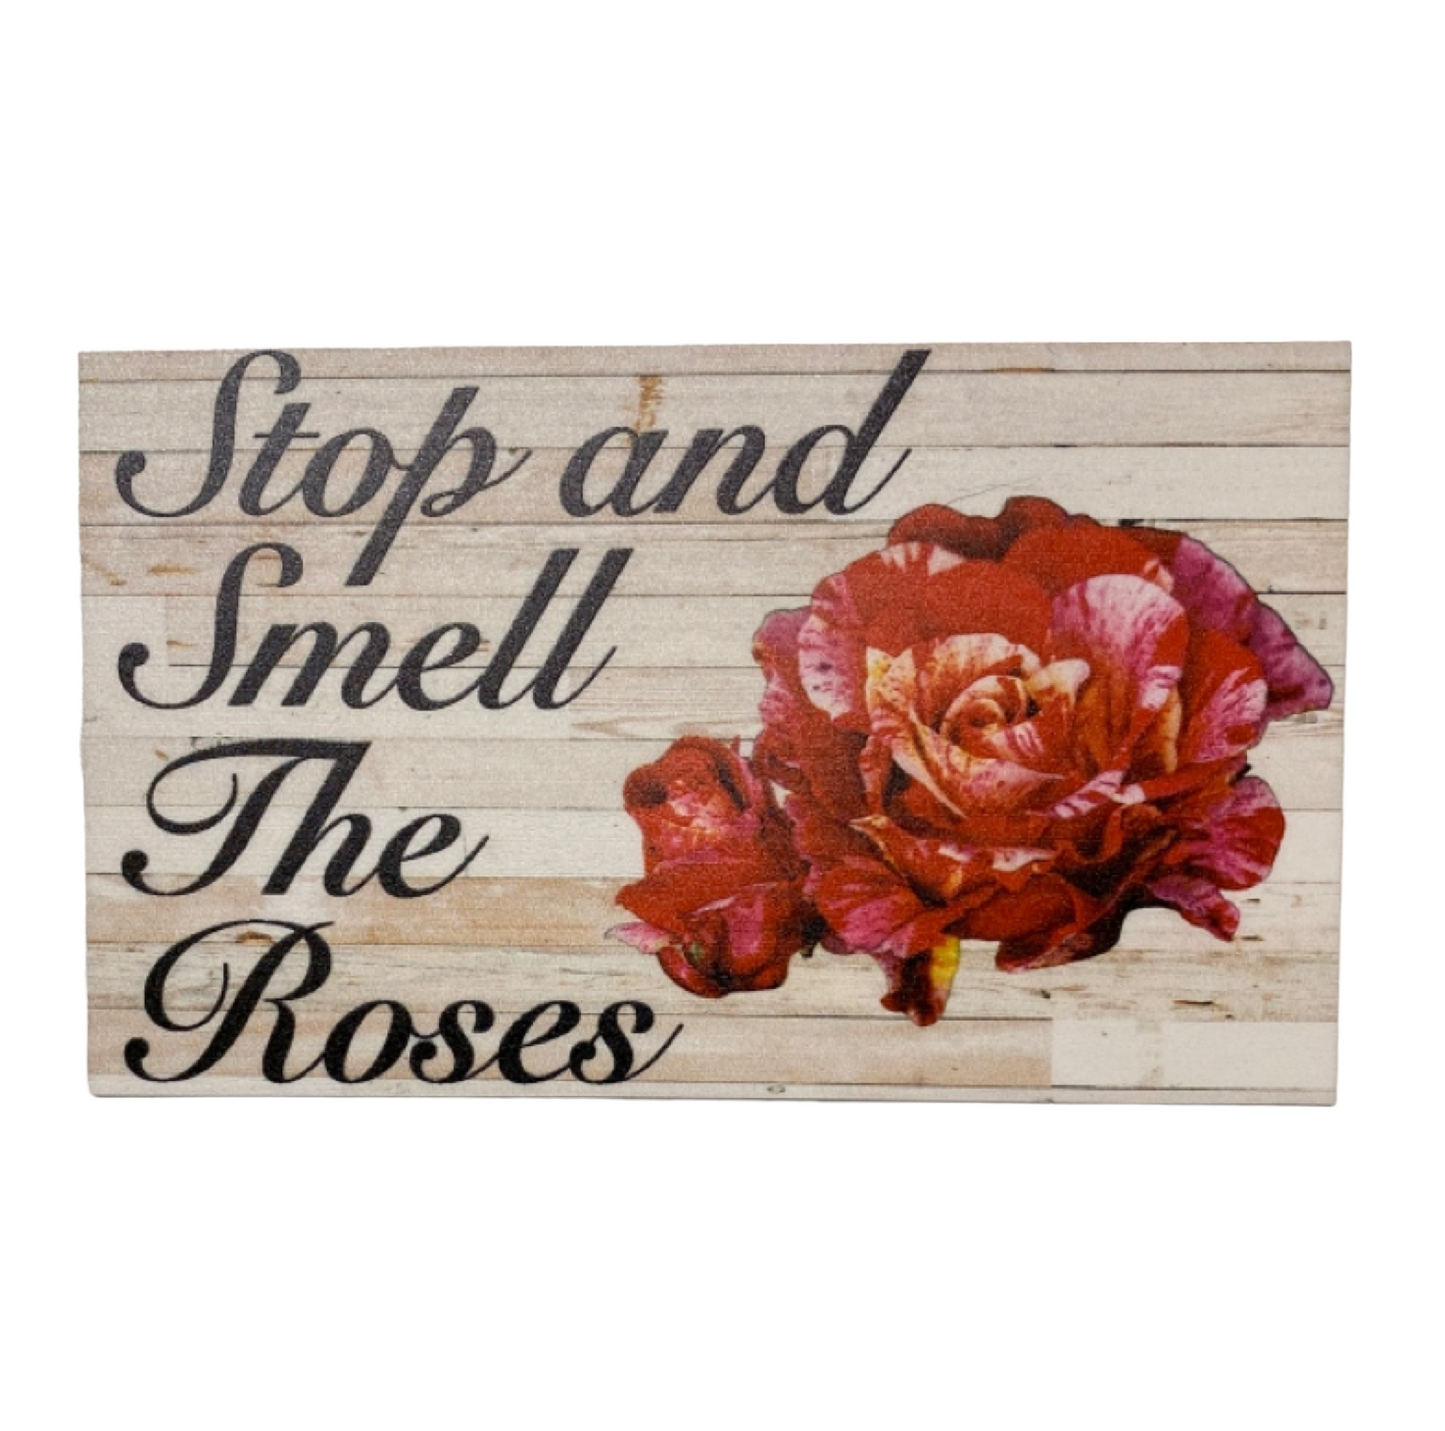 Stop And Smell The Roses Garden Sign - The Renmy Store Homewares & Gifts 